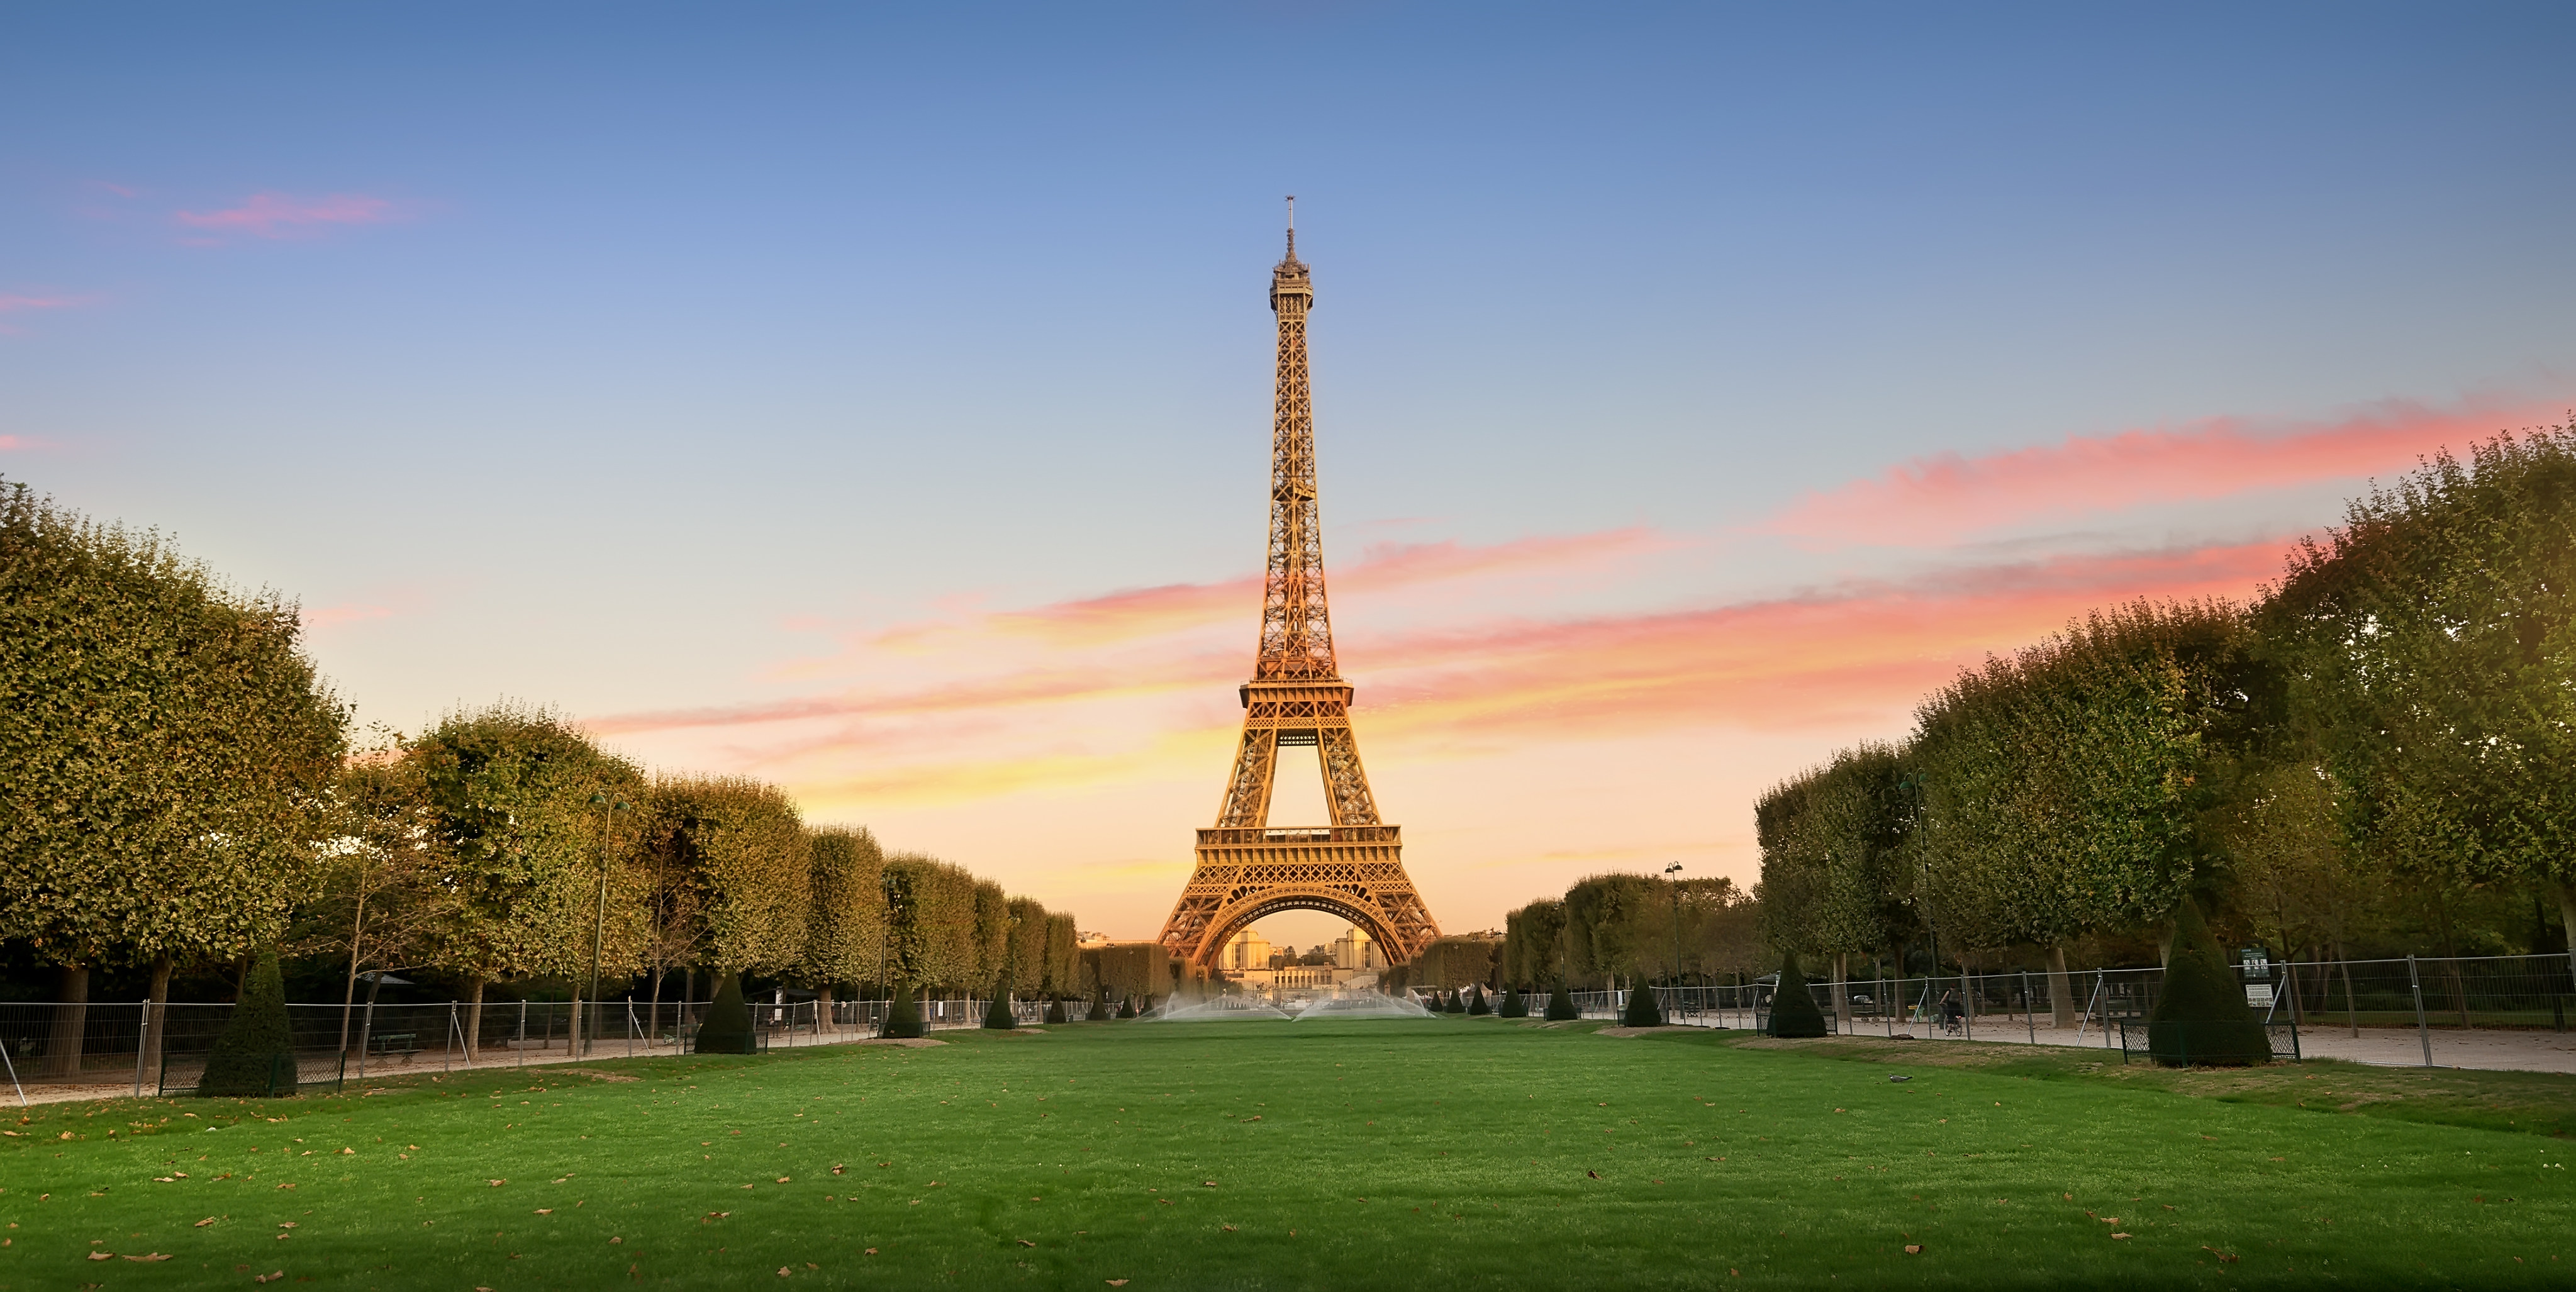 Victor Lustig’s scheme to sell the Eiffel Tower has become one of his most notorious scams. Photo: Shutterstock